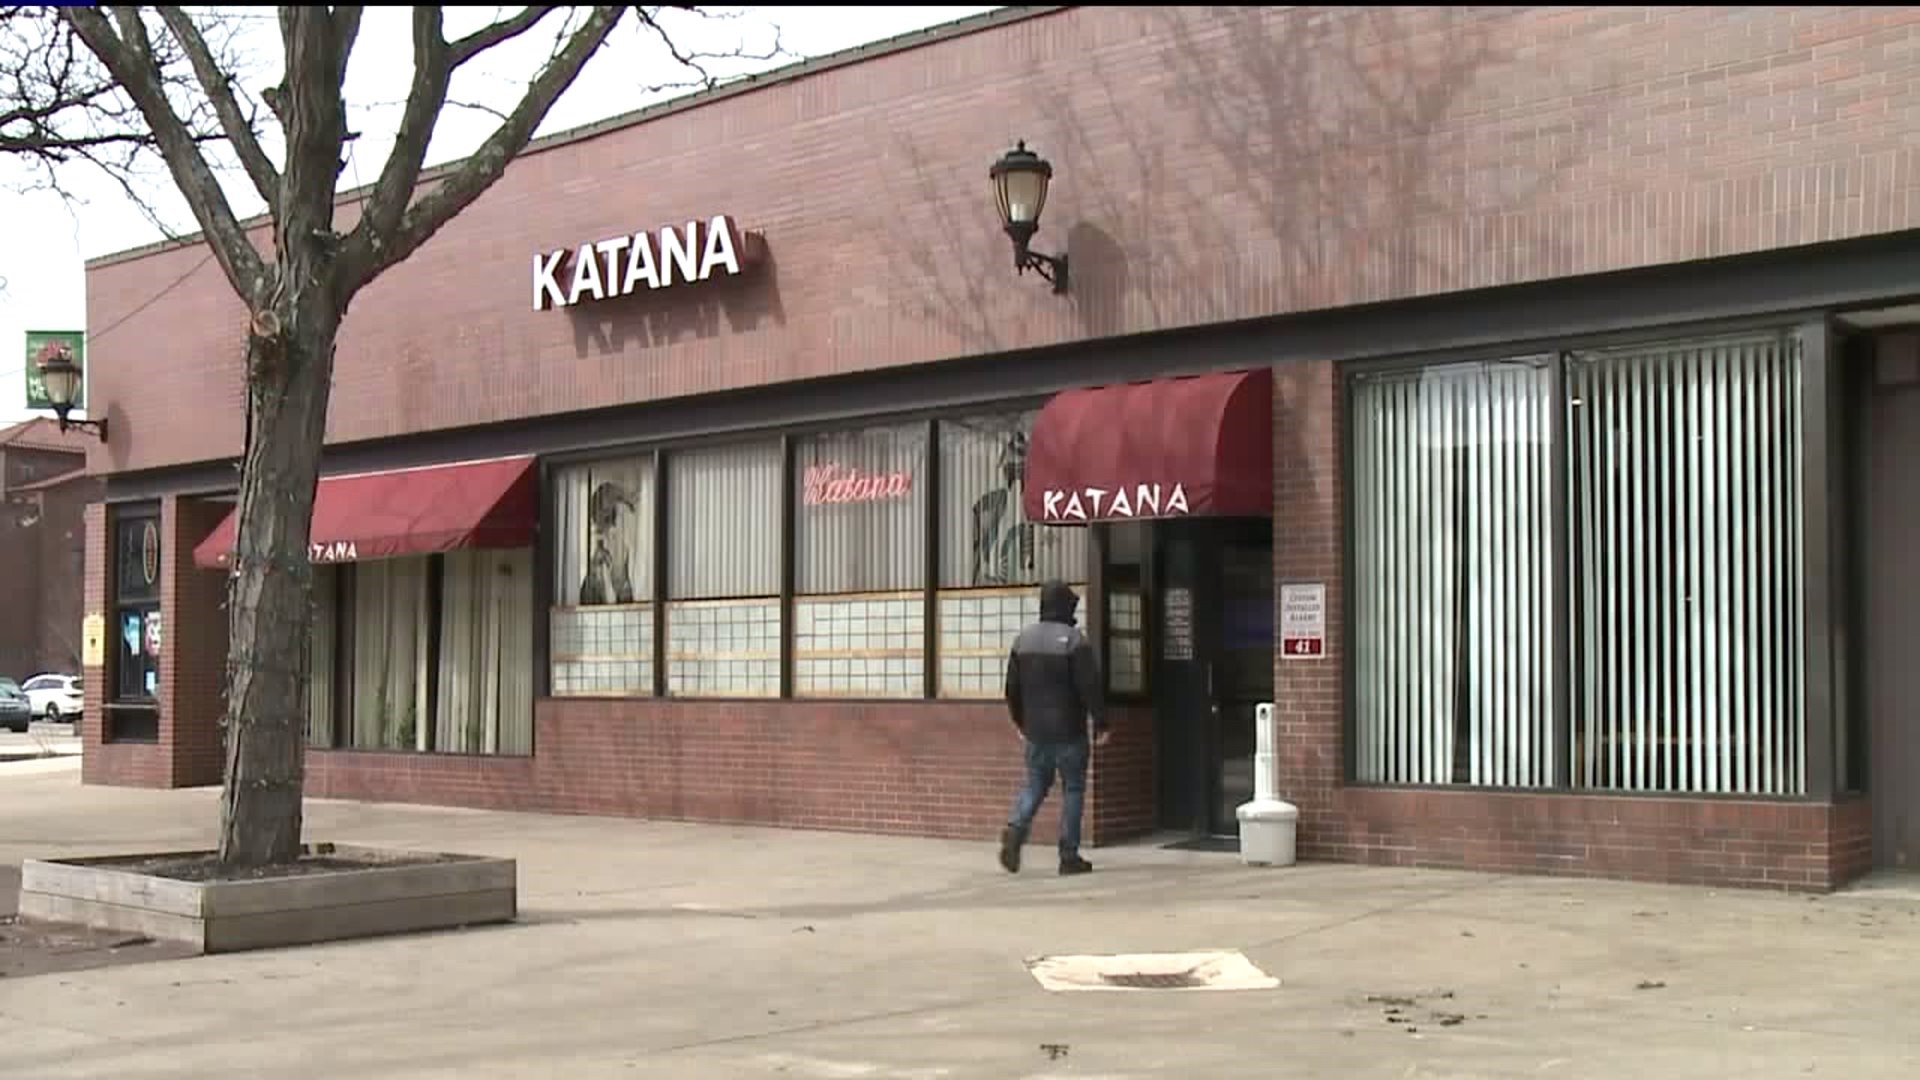 'Katana' Restaurant in Wilkes-Barre Closing after Decades in Business